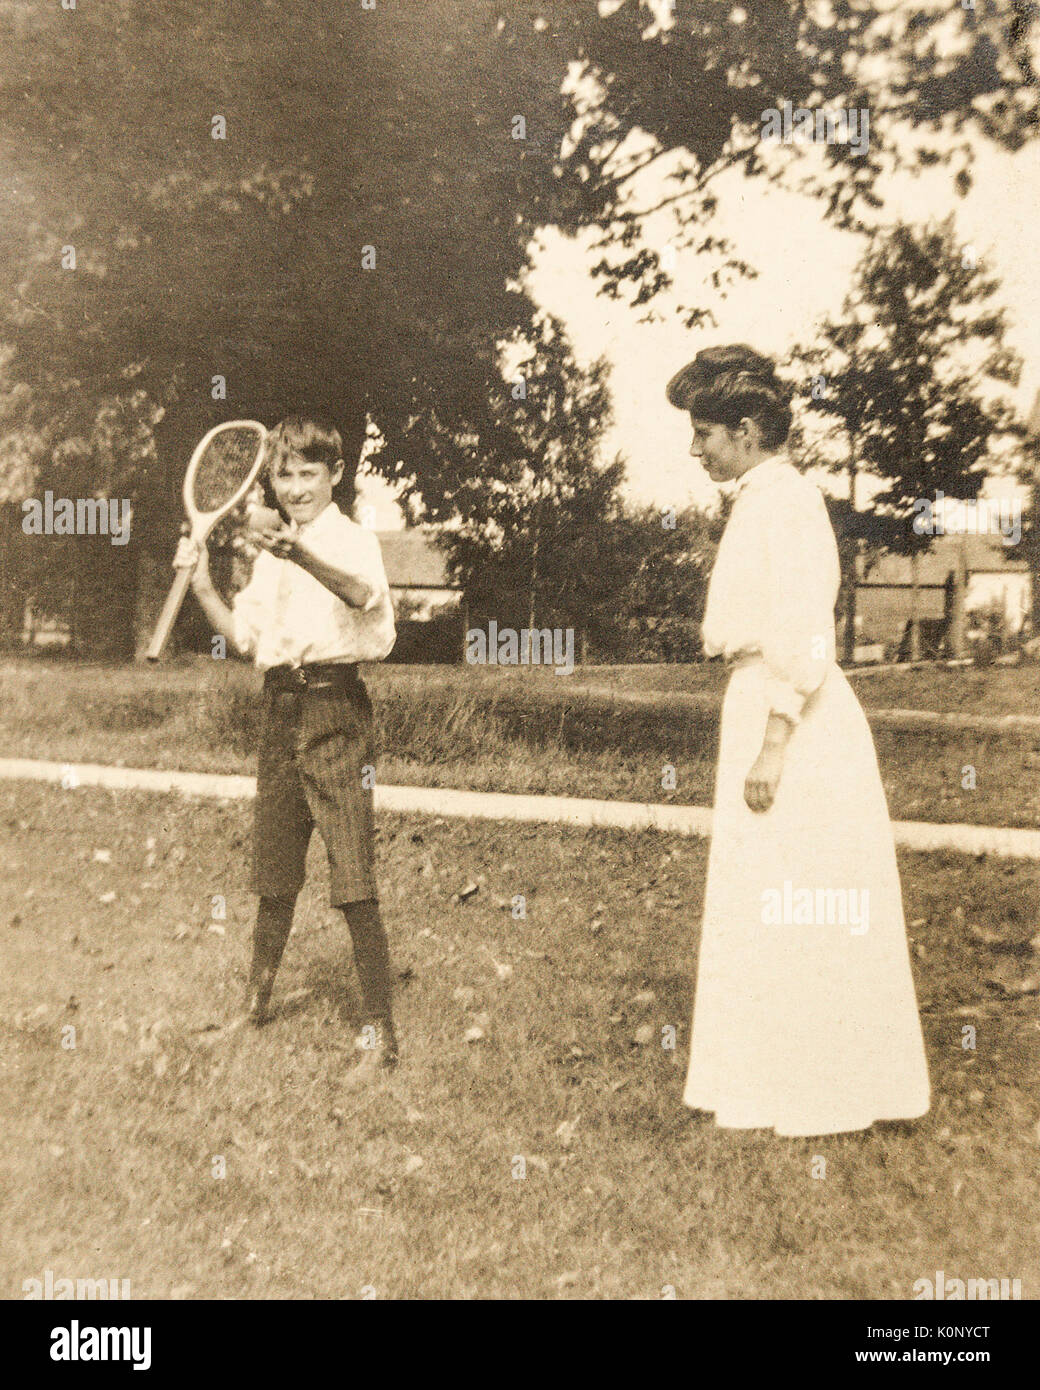 A young boy with a tennis racket and ball in 1907 1908 with a young  woman Stock Photo